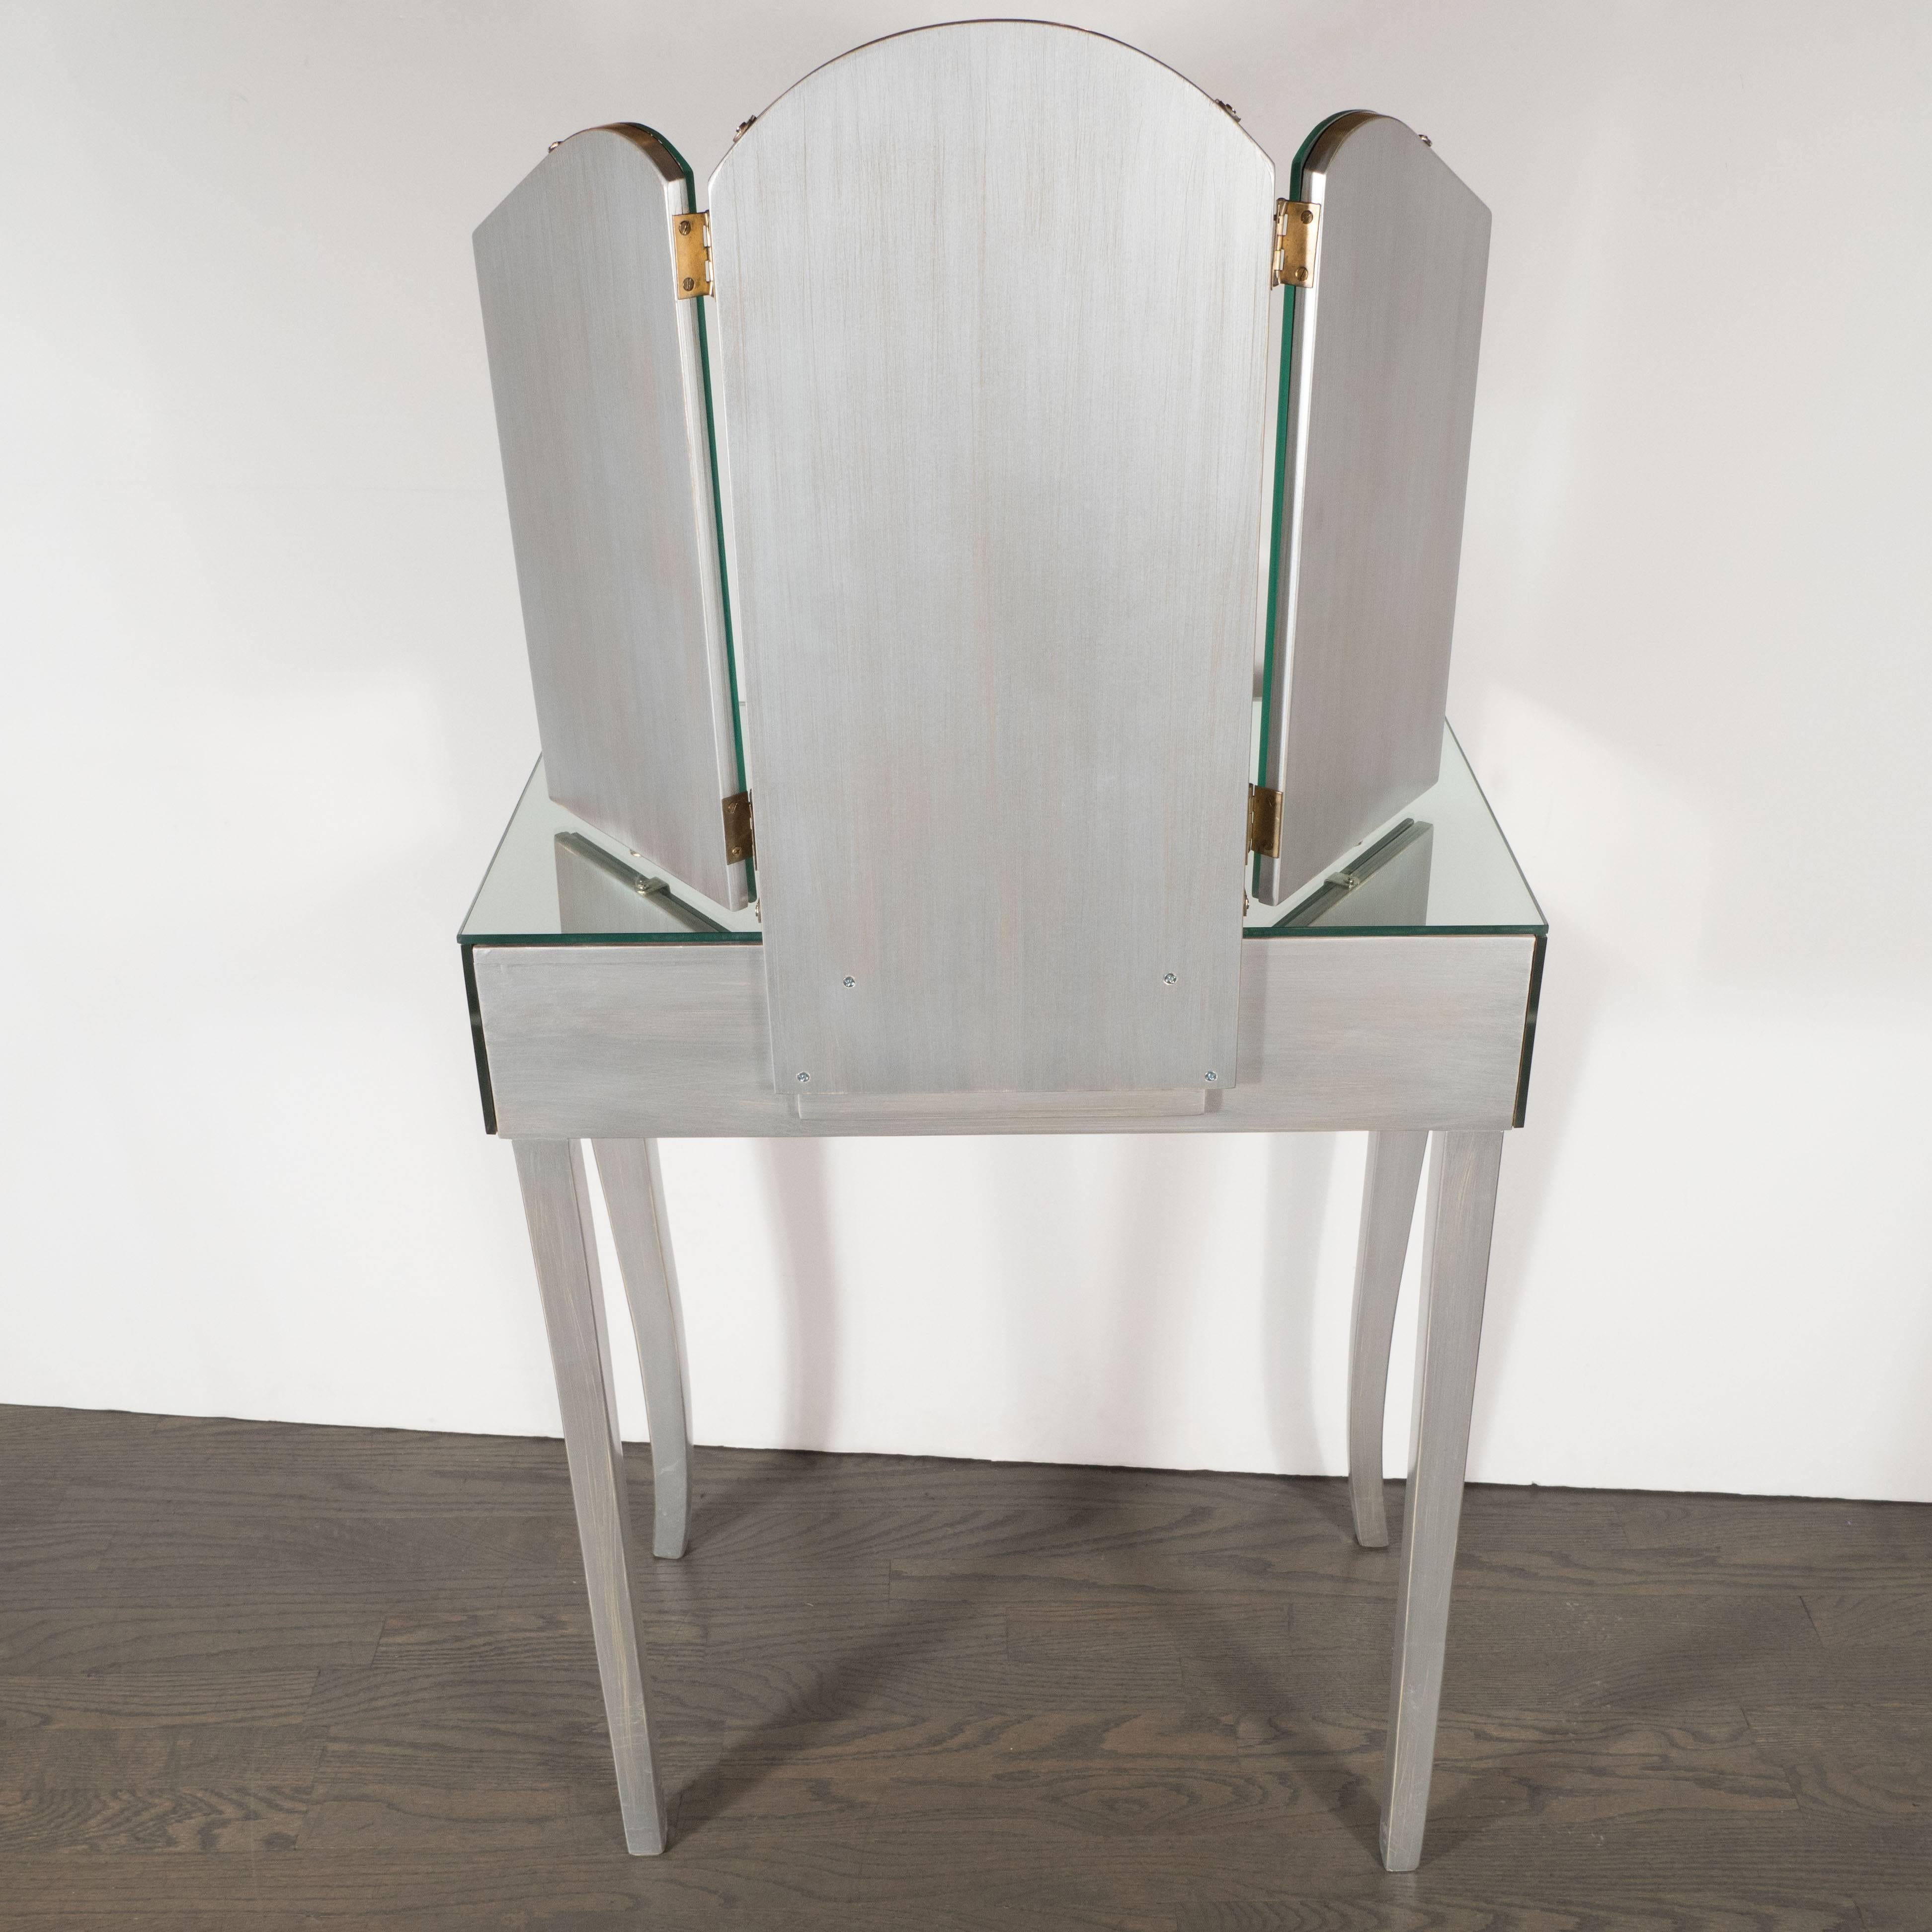 Art Deco 1940s Hollywood Vanity with Silver Leaf Cabriolet Legs and Smoked/Antique Mirror